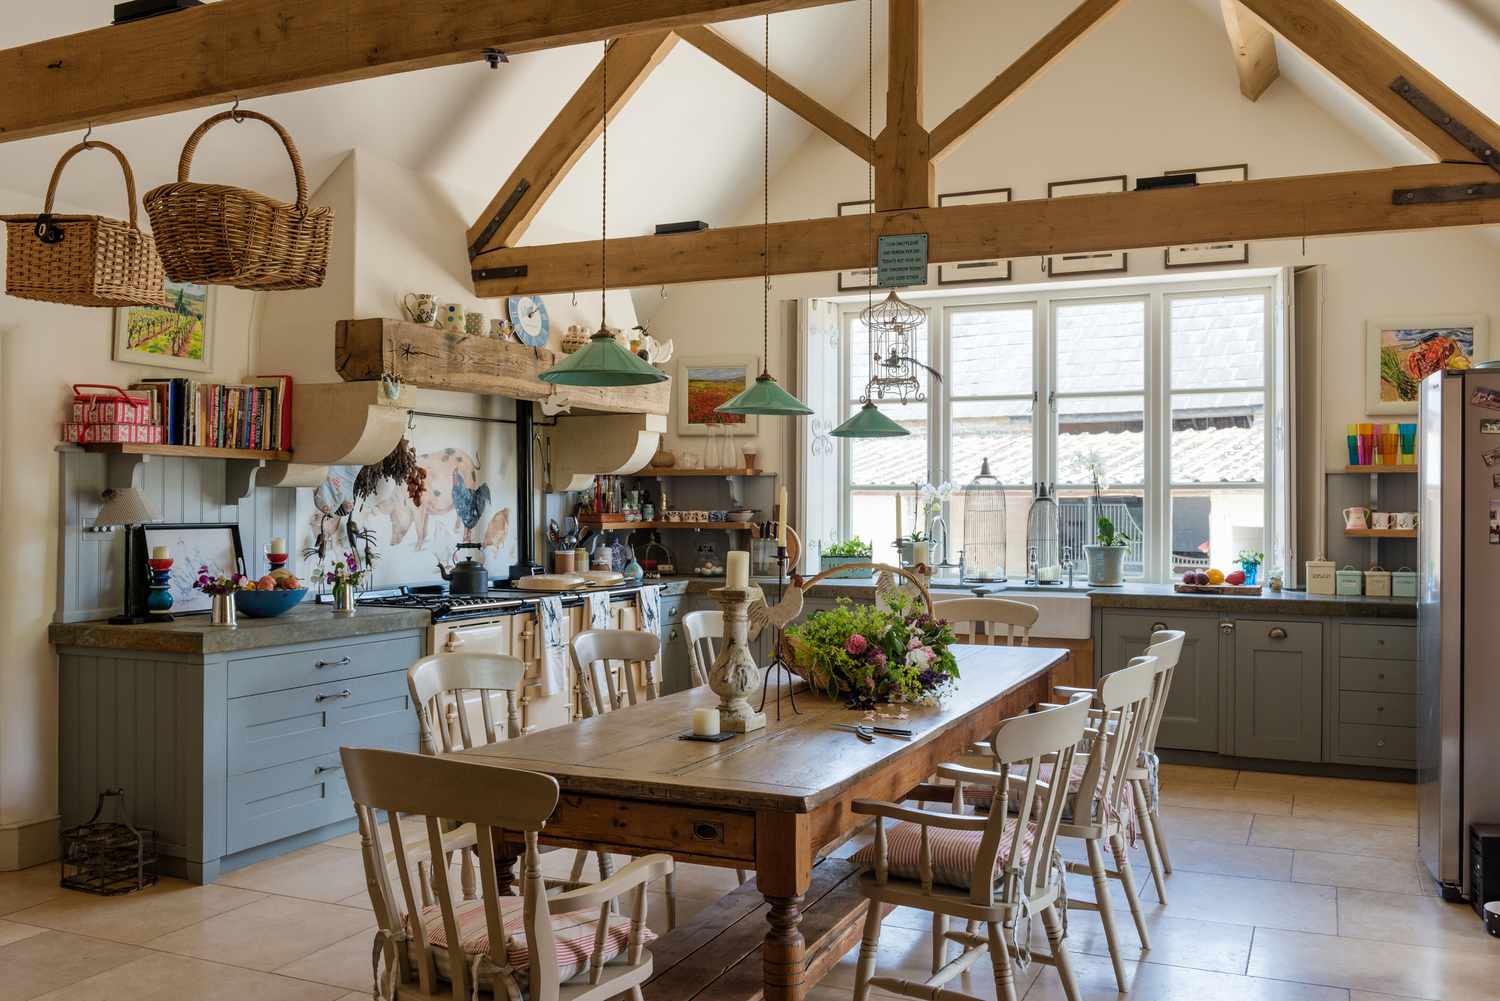 Vintage farmhouse table in rustic kitchen with green hanging lights from Holloways of Ludlow, aga, and beamed ceiling